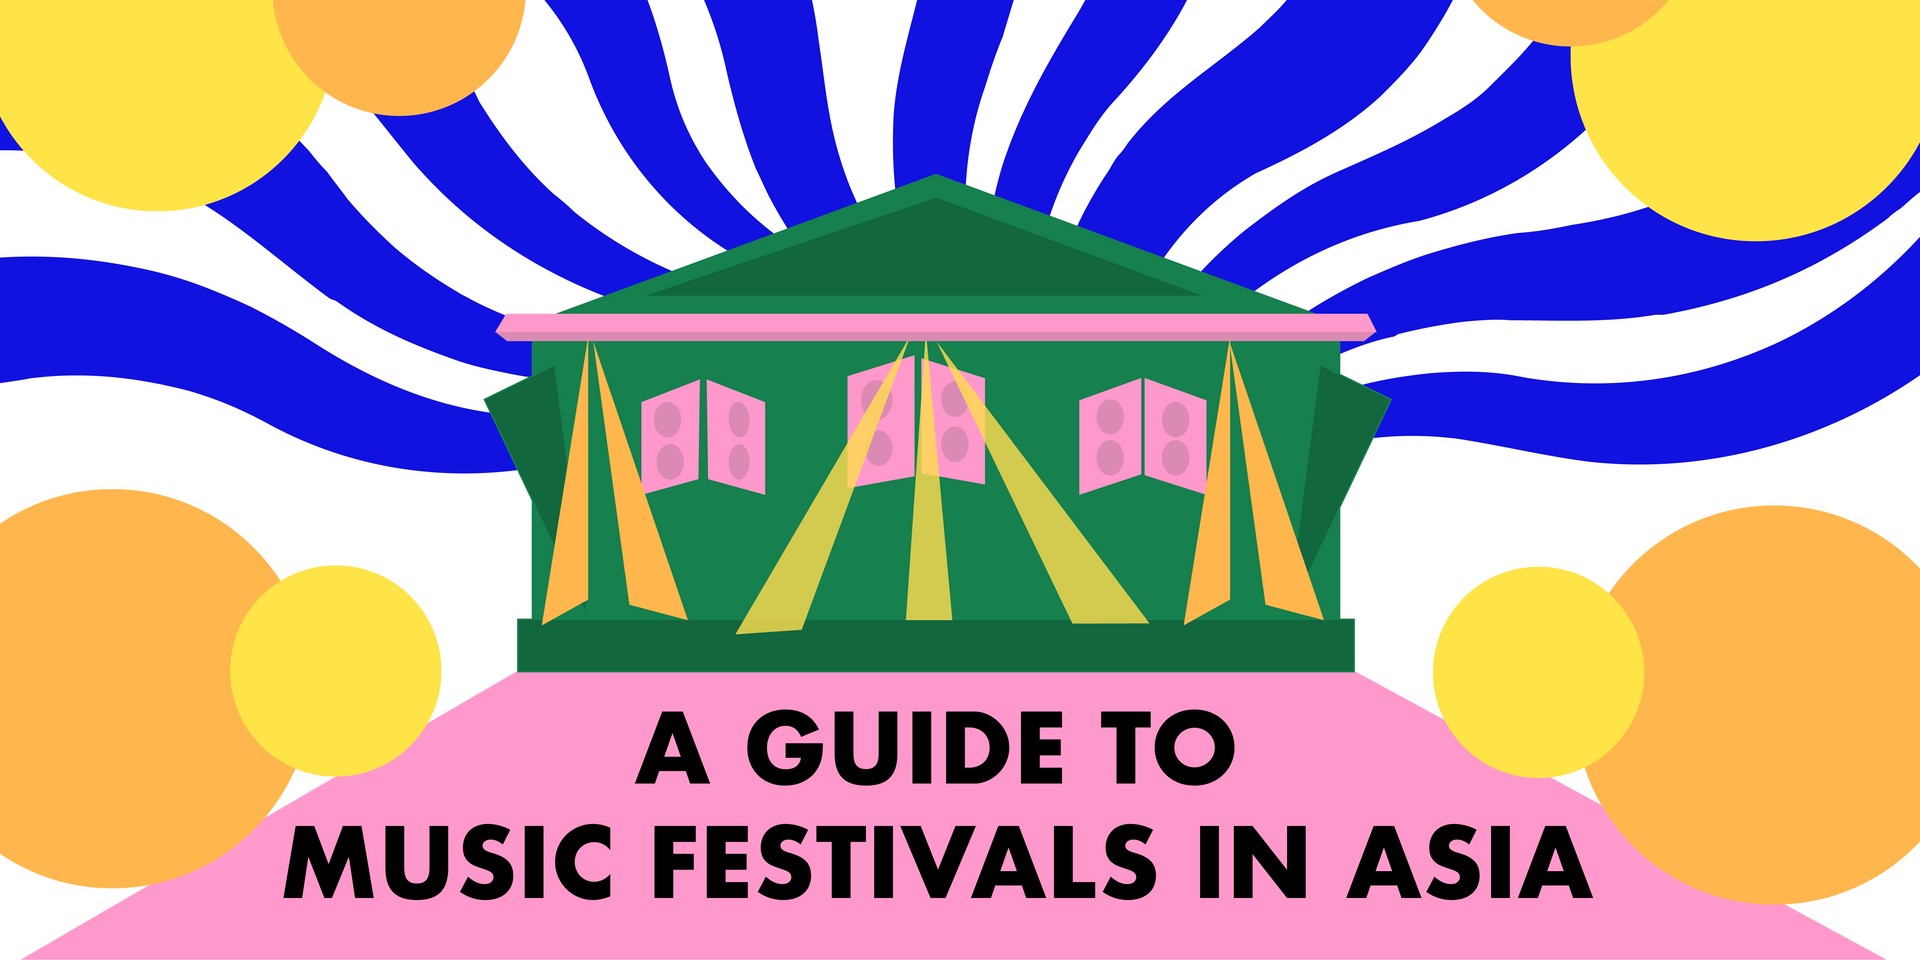 A guide to music festivals in Asia in 2019 